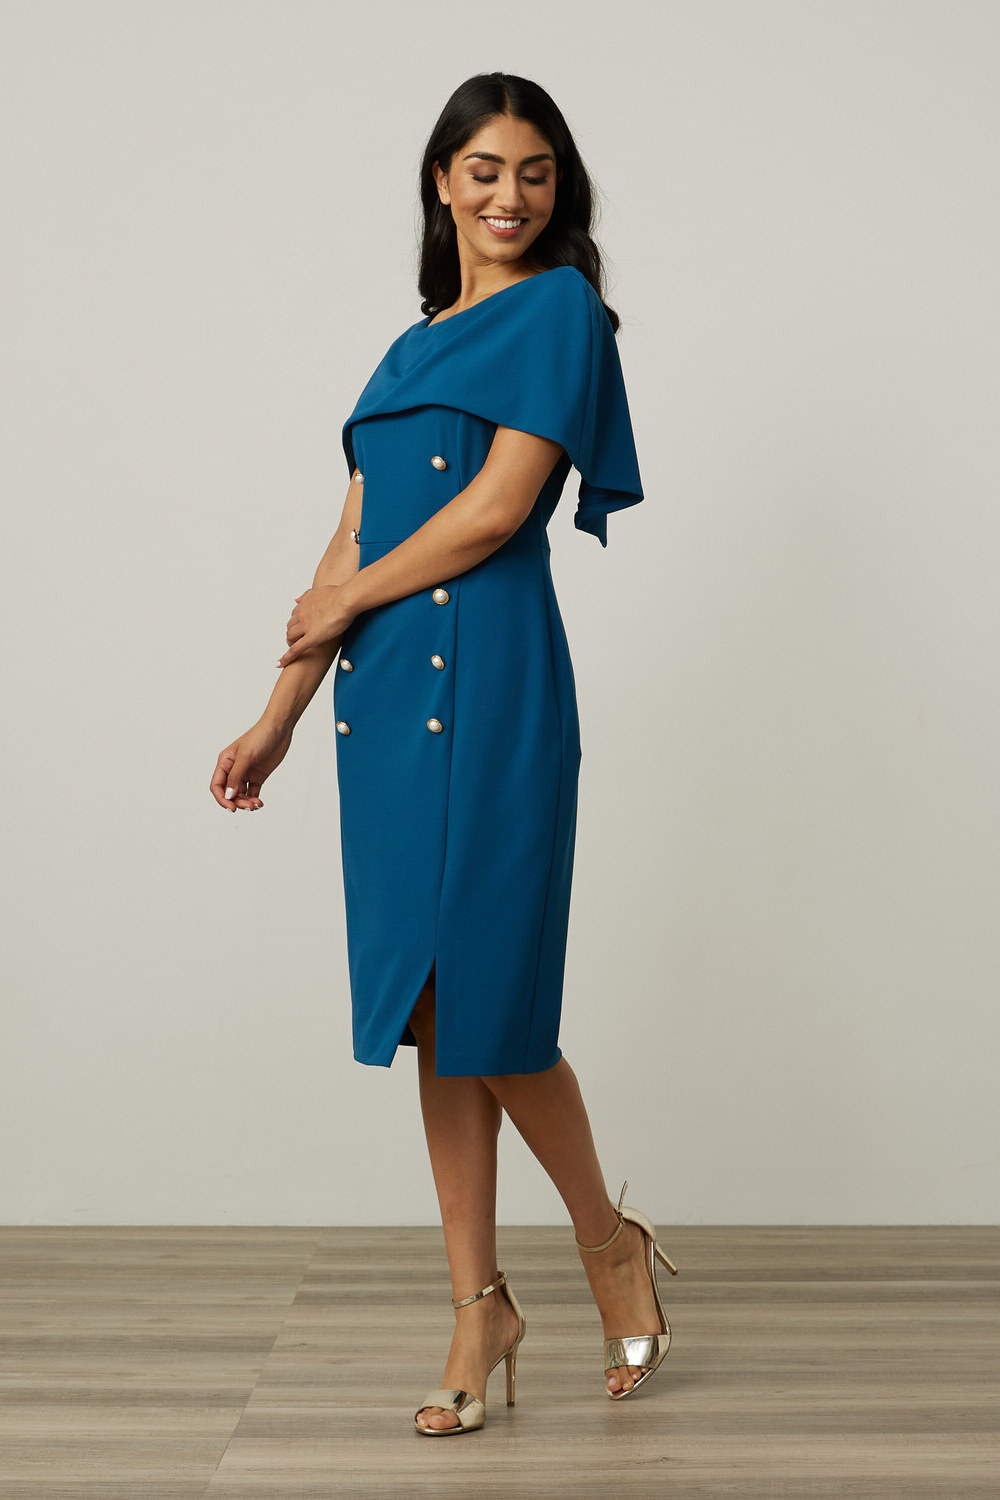 Joseph Ribkoff Overlay Double-Breasted Dress Style 213719. Peacock